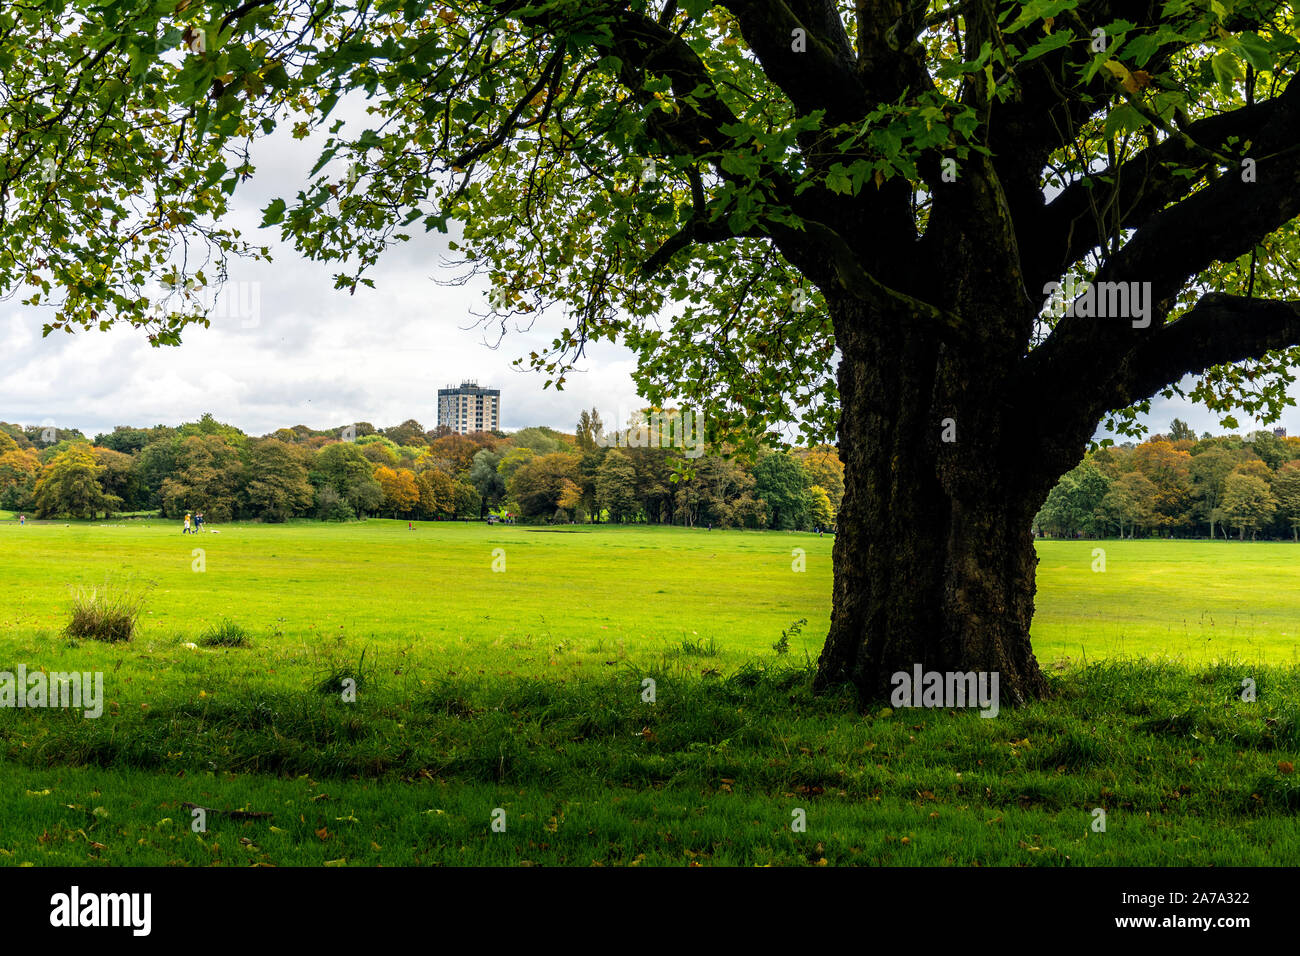 Sefton Park, People walking framed by an old tree, Liverpool, England, UK  Stock Photo - Alamy